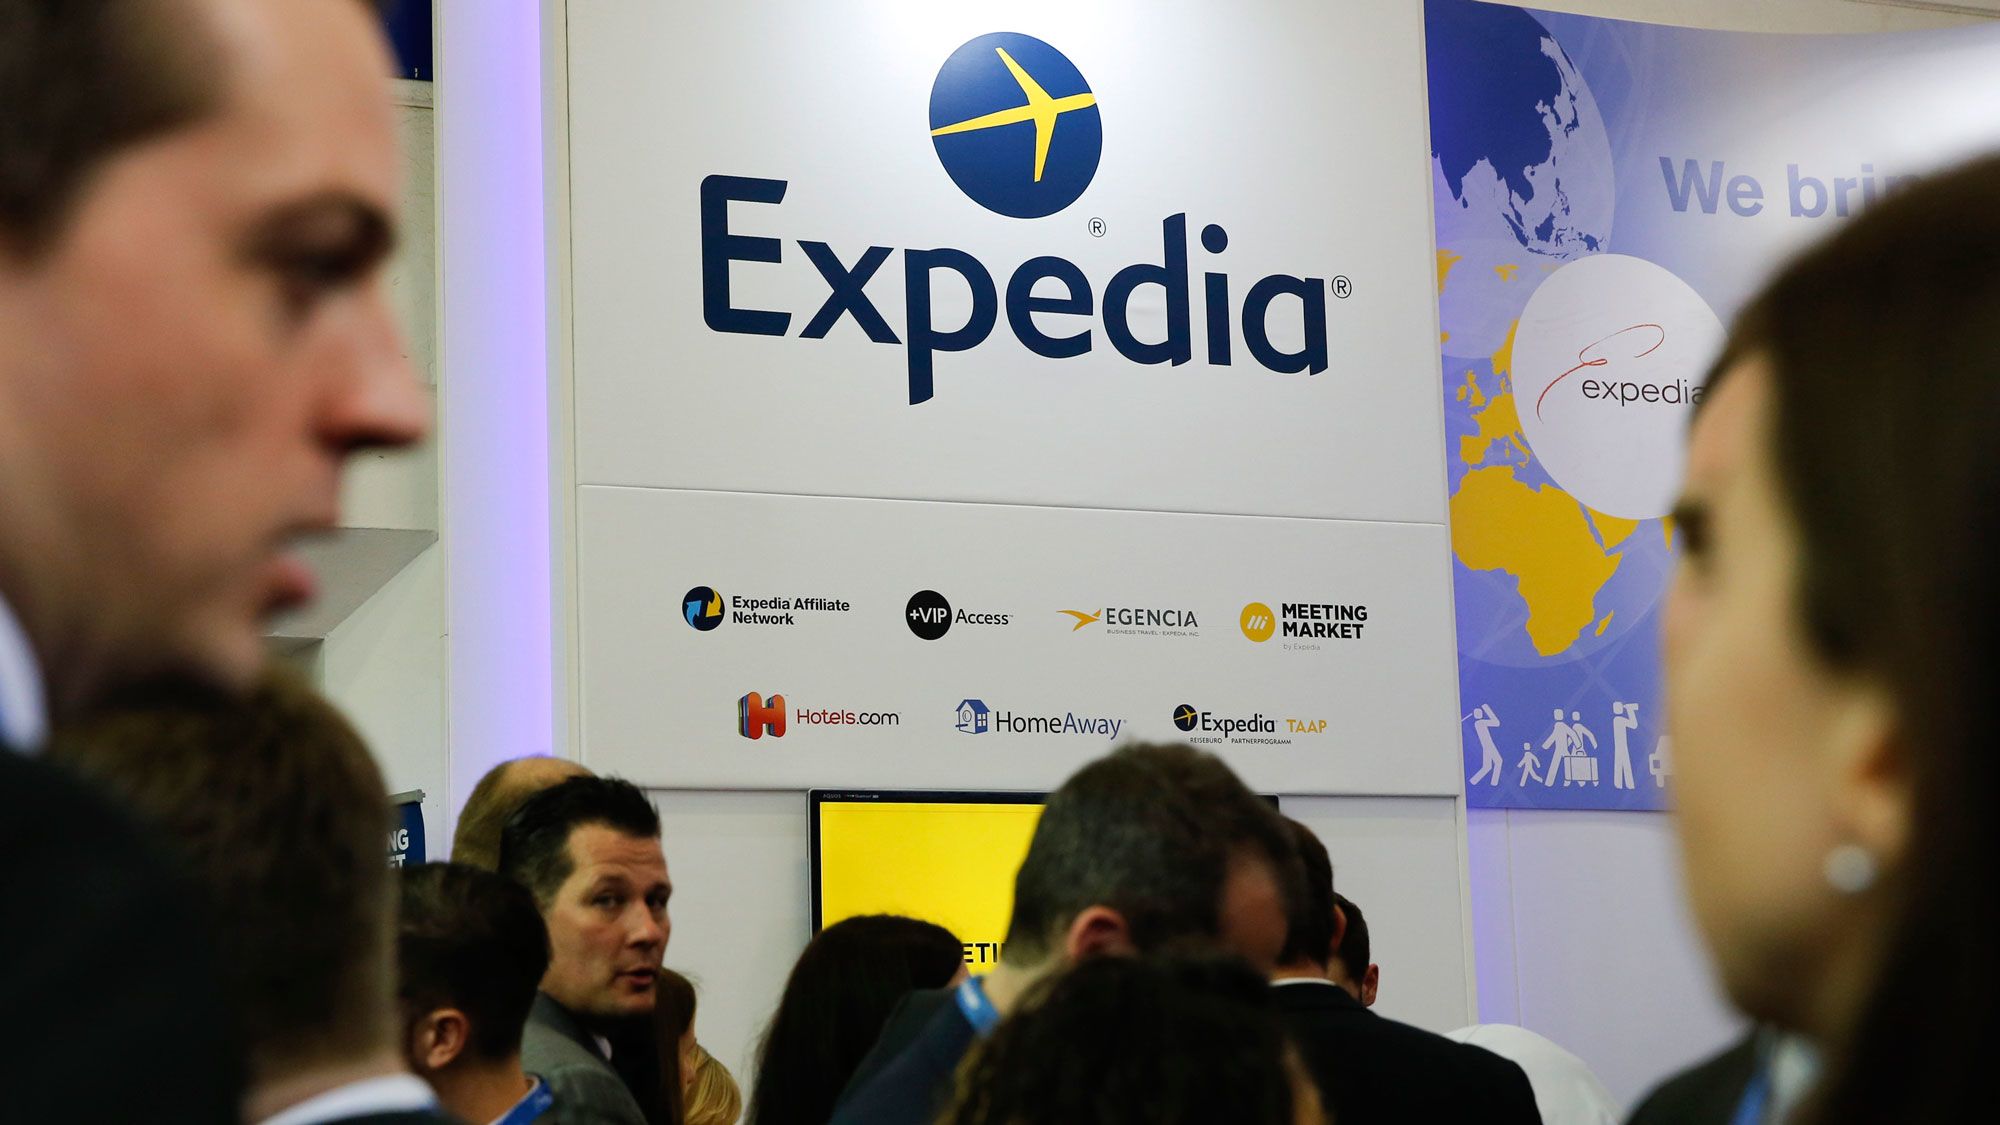 Expedia CEO Mark Okerstrom warns against Europe digital services taxes